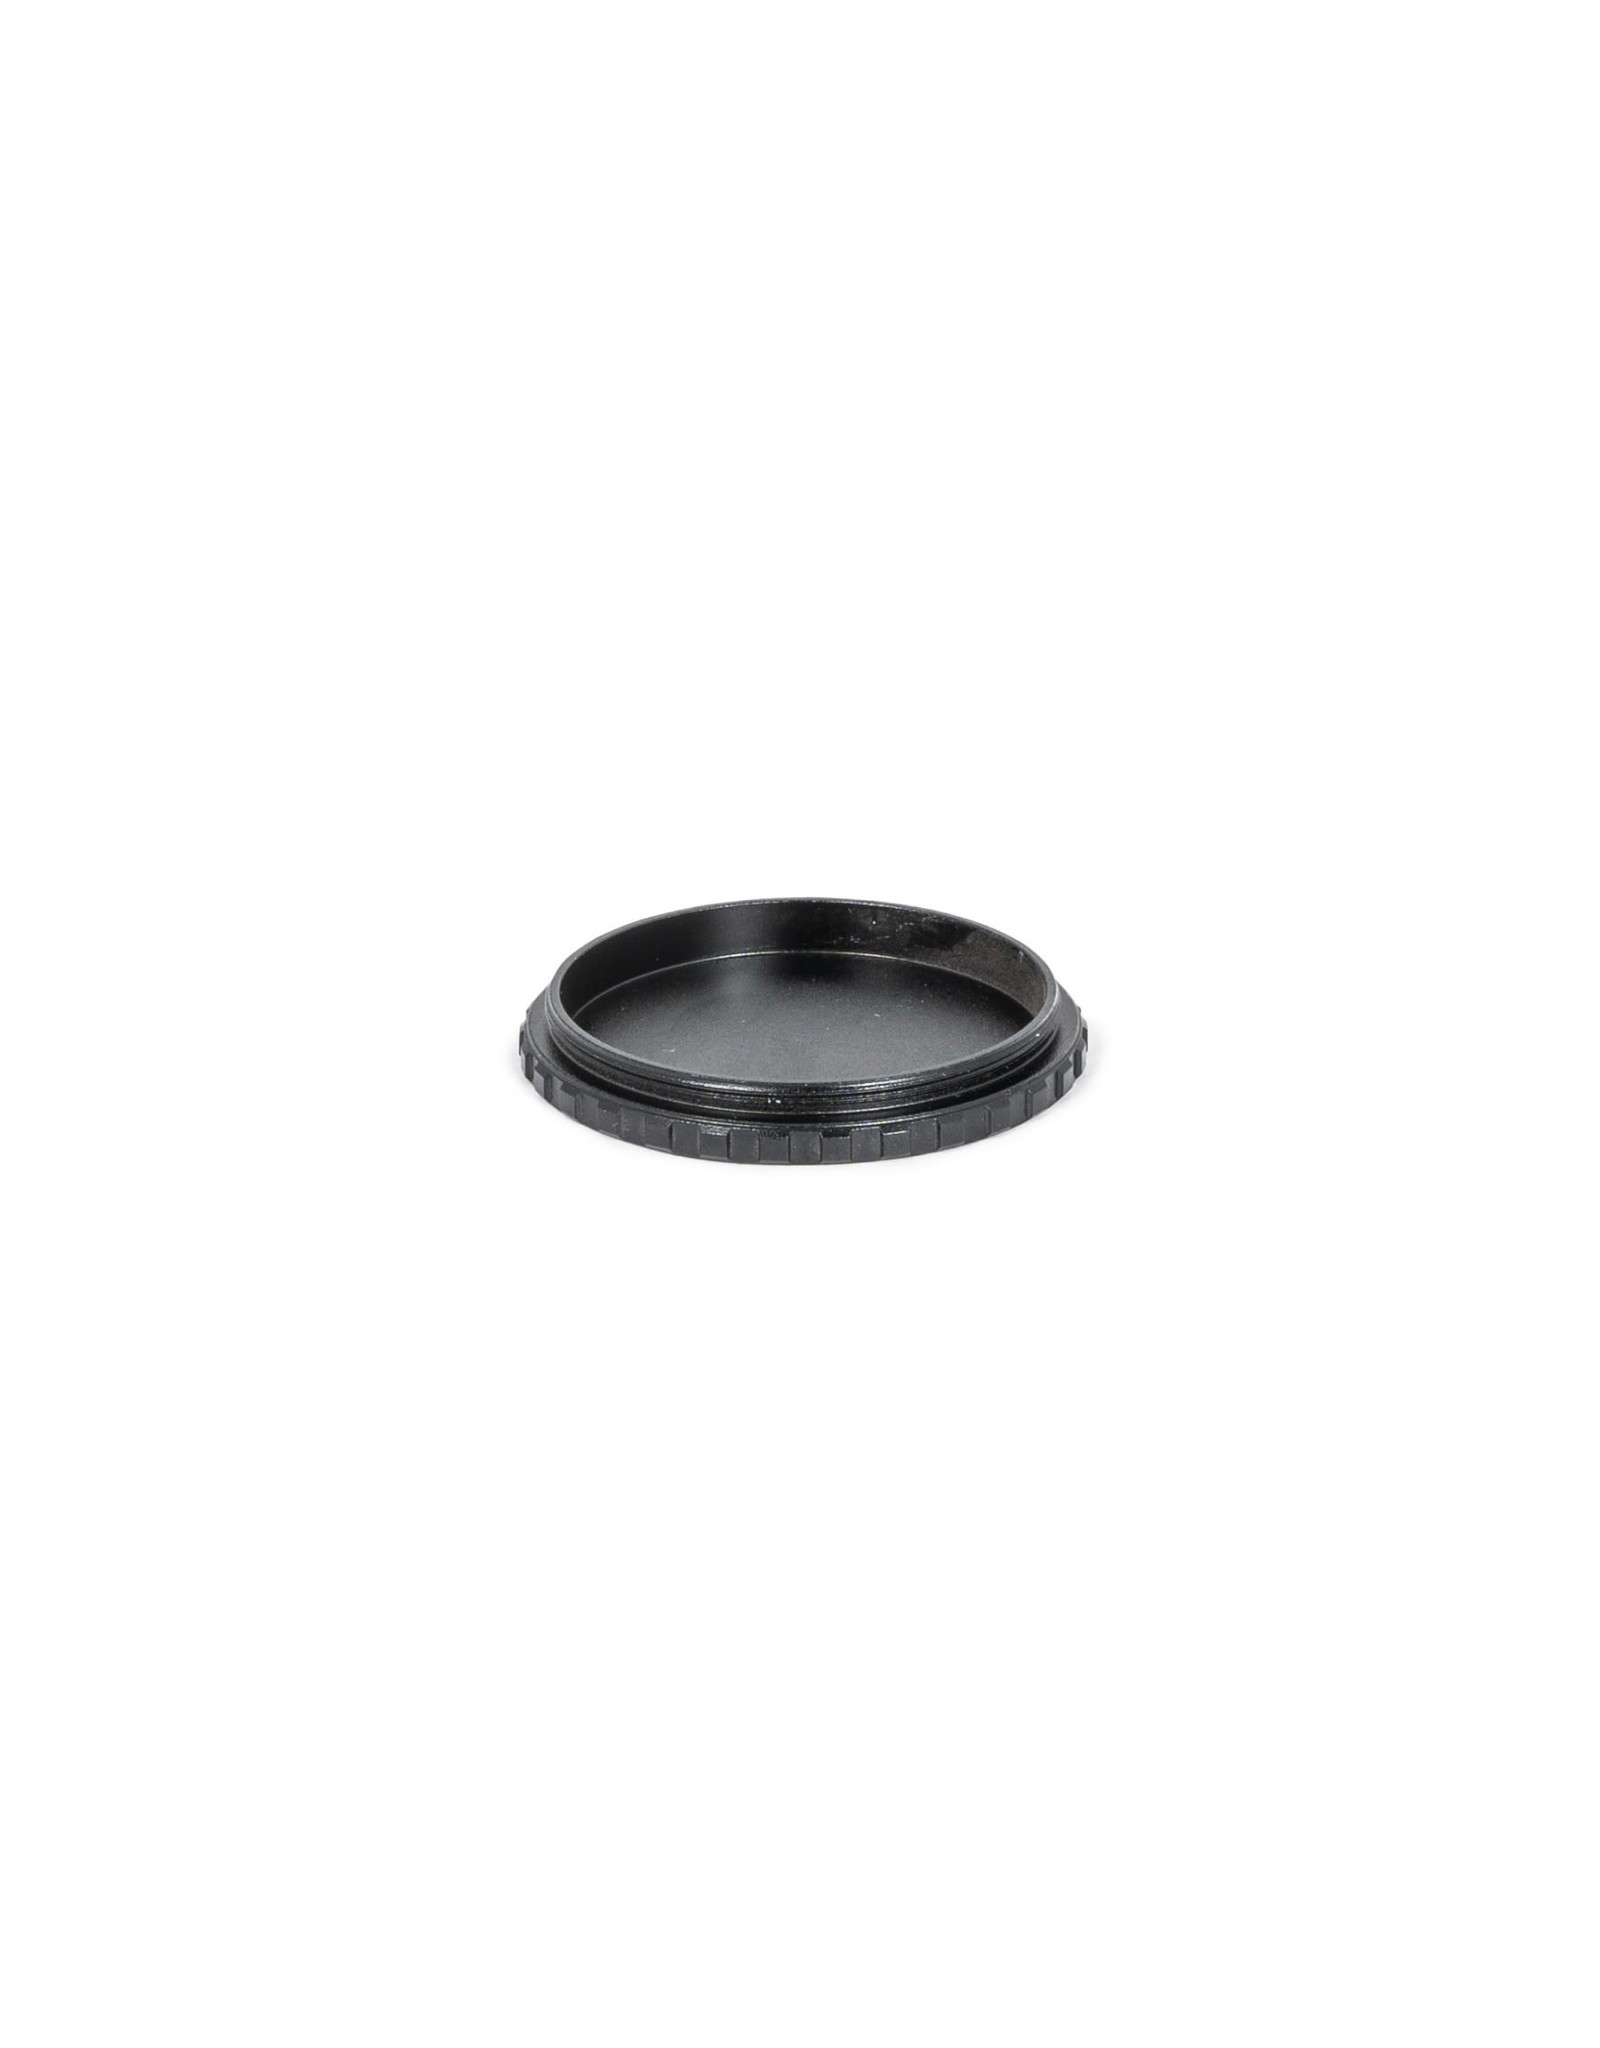 Baader Planetarium Baader M48 Metal Dustcap with M48 outer thread